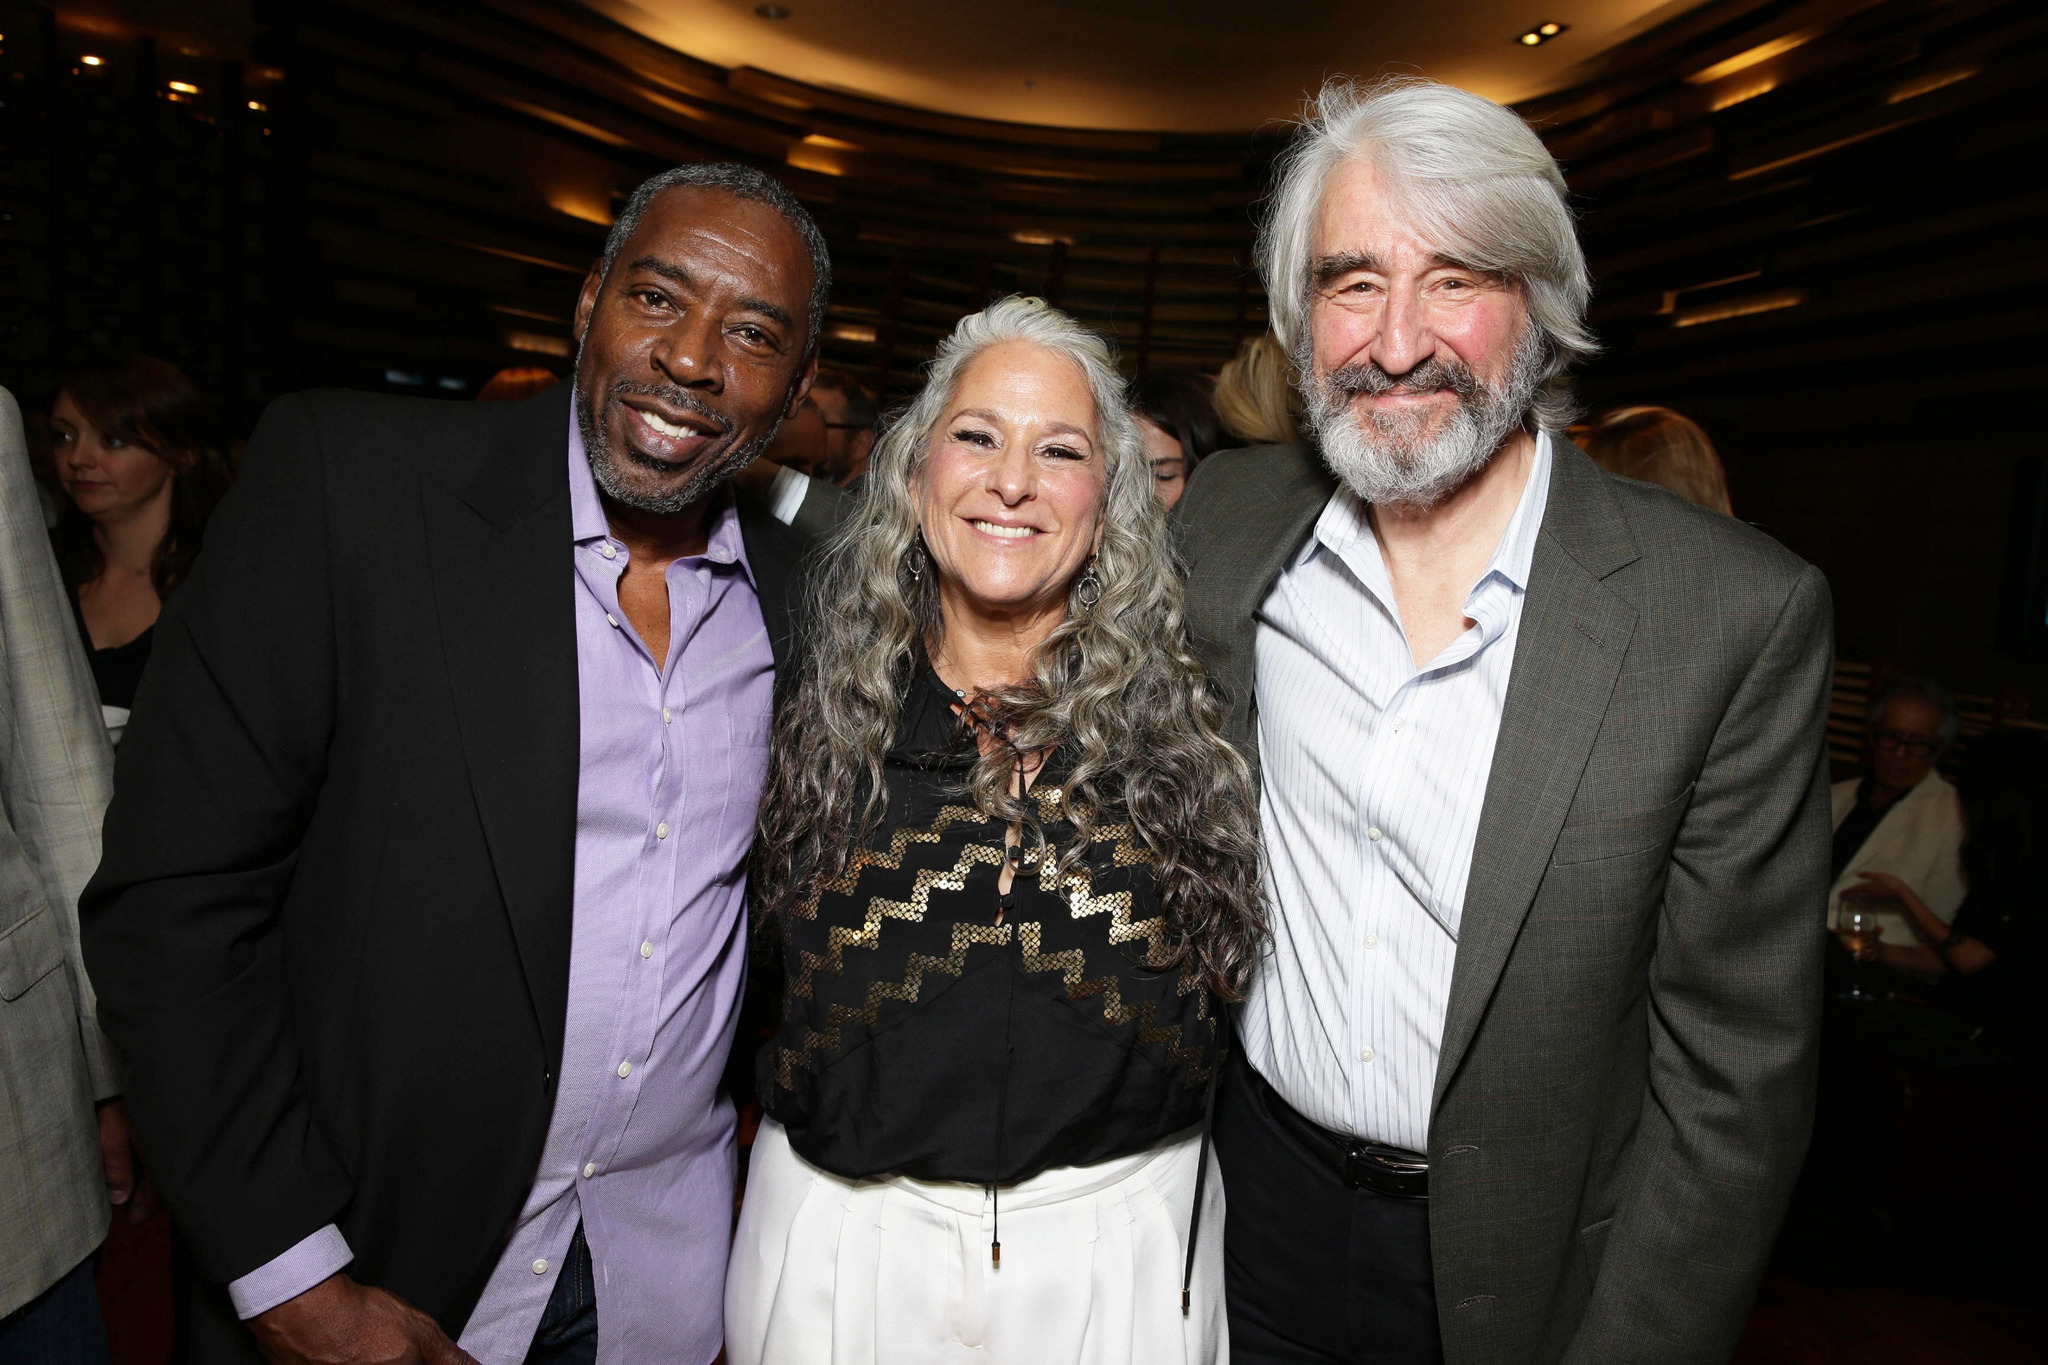 Ernie Hudson, Sam Waterston and Marta Kauffman at event of Grace and Frankie (2015)